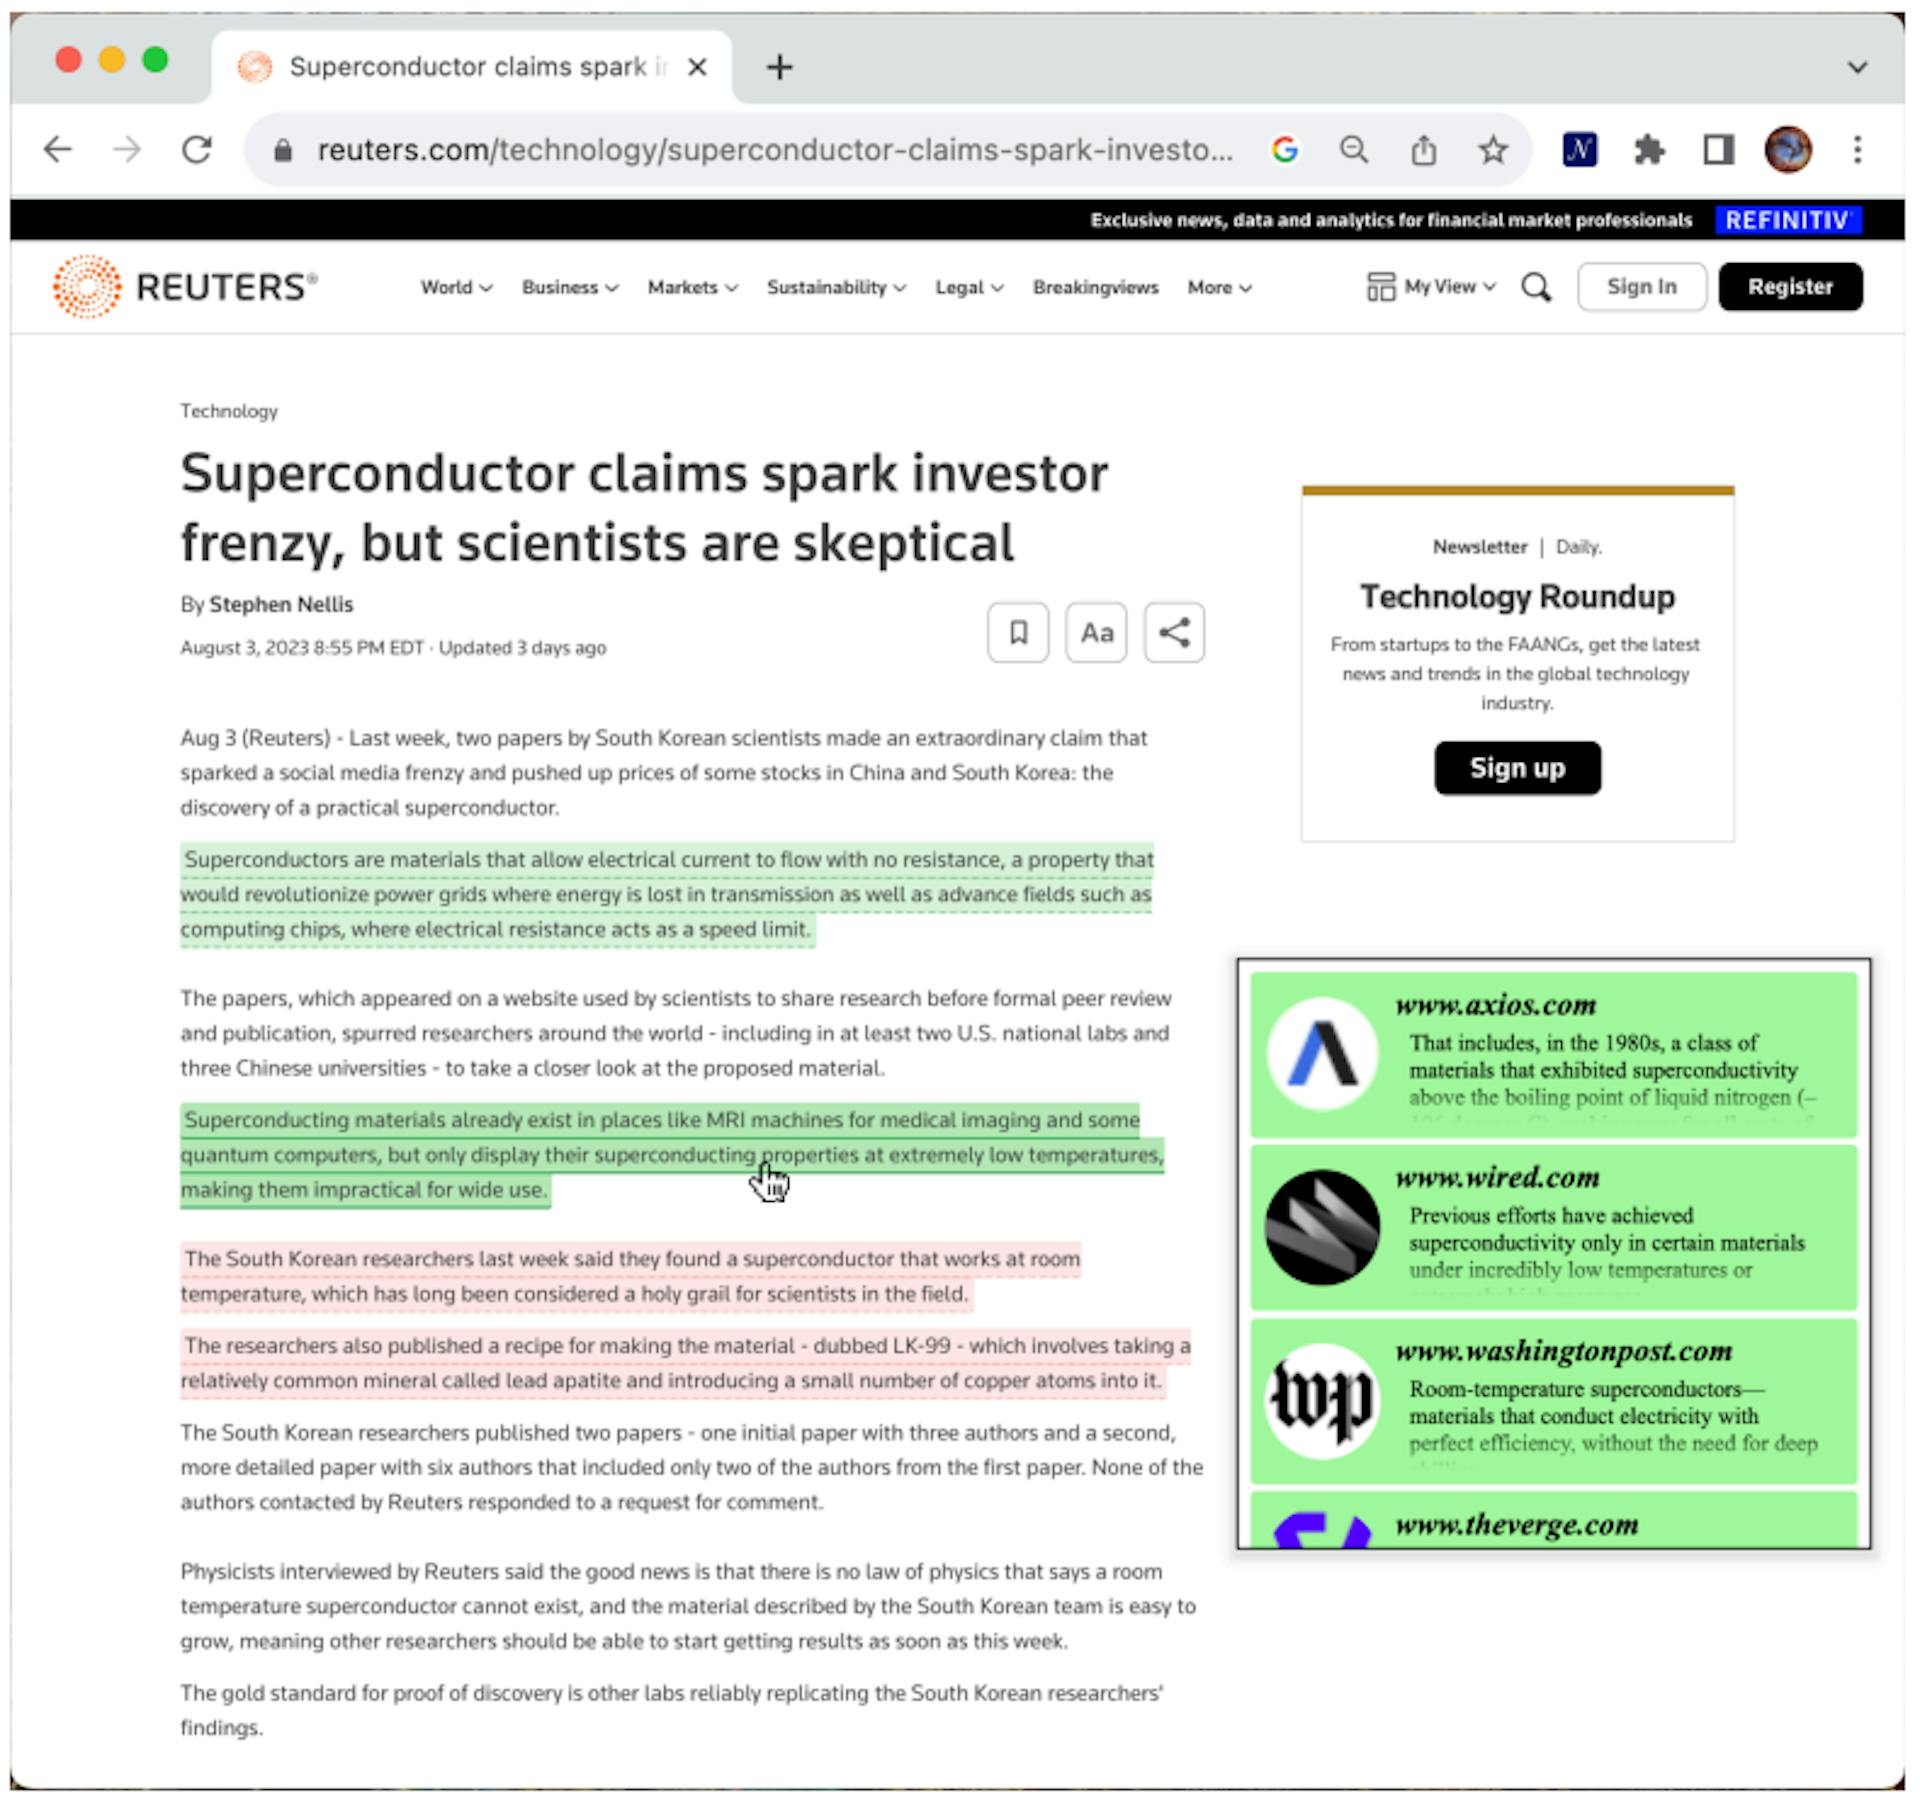 Figure 1: A screenshot from NEWSSENSE browser extension running in Chrome. The extension provides highlights indicated supported and controversial information. When the user clicks on a highlighted sentence, NEWSENSE adds an scrollable overlay box containing snippets of external evidence.